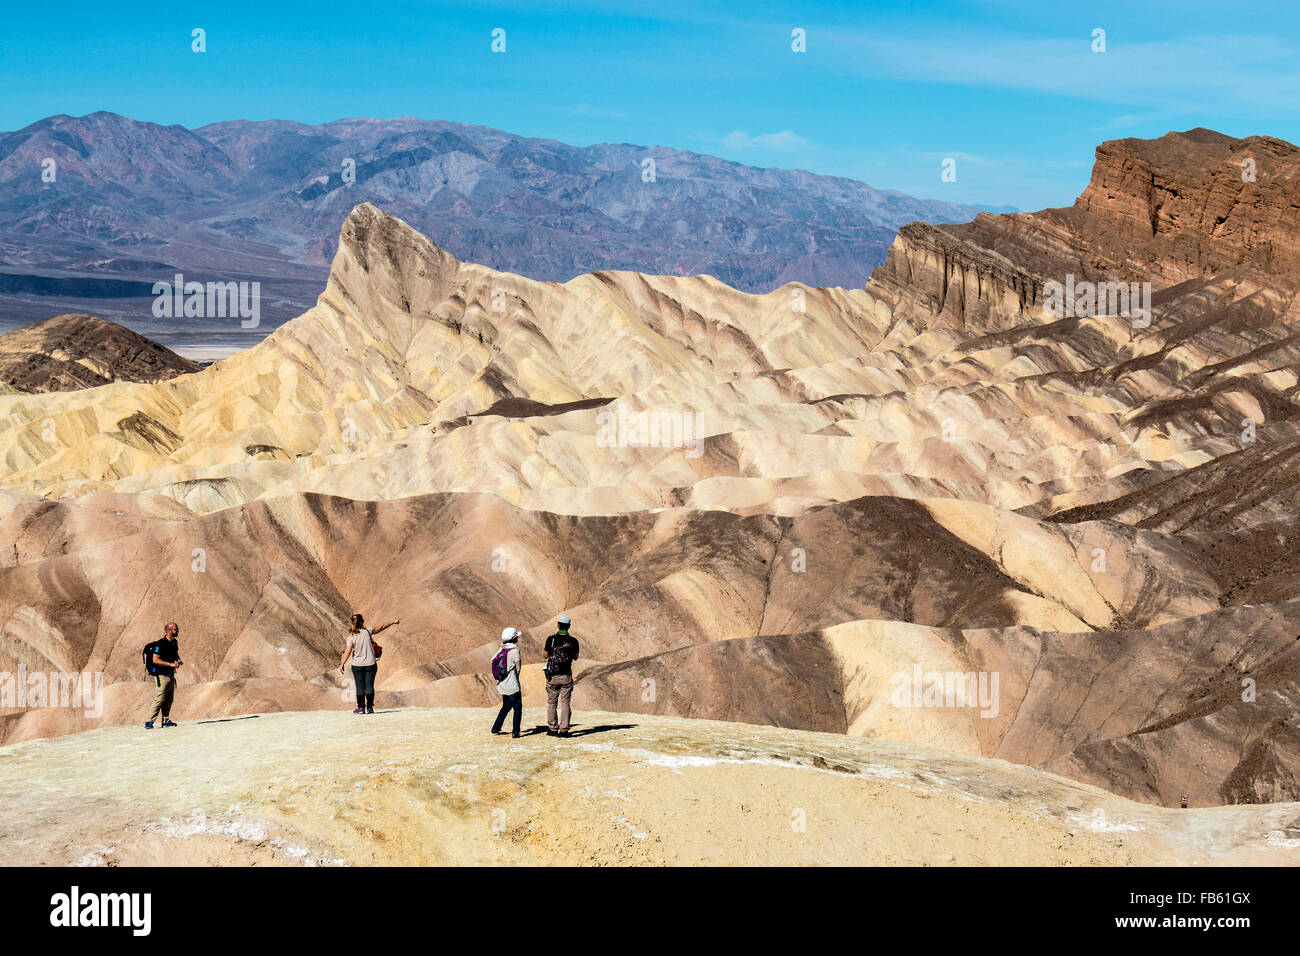 People taking in view from Death Valley's famous Zabriskie Point of surrounding desert hills. Stock Photo